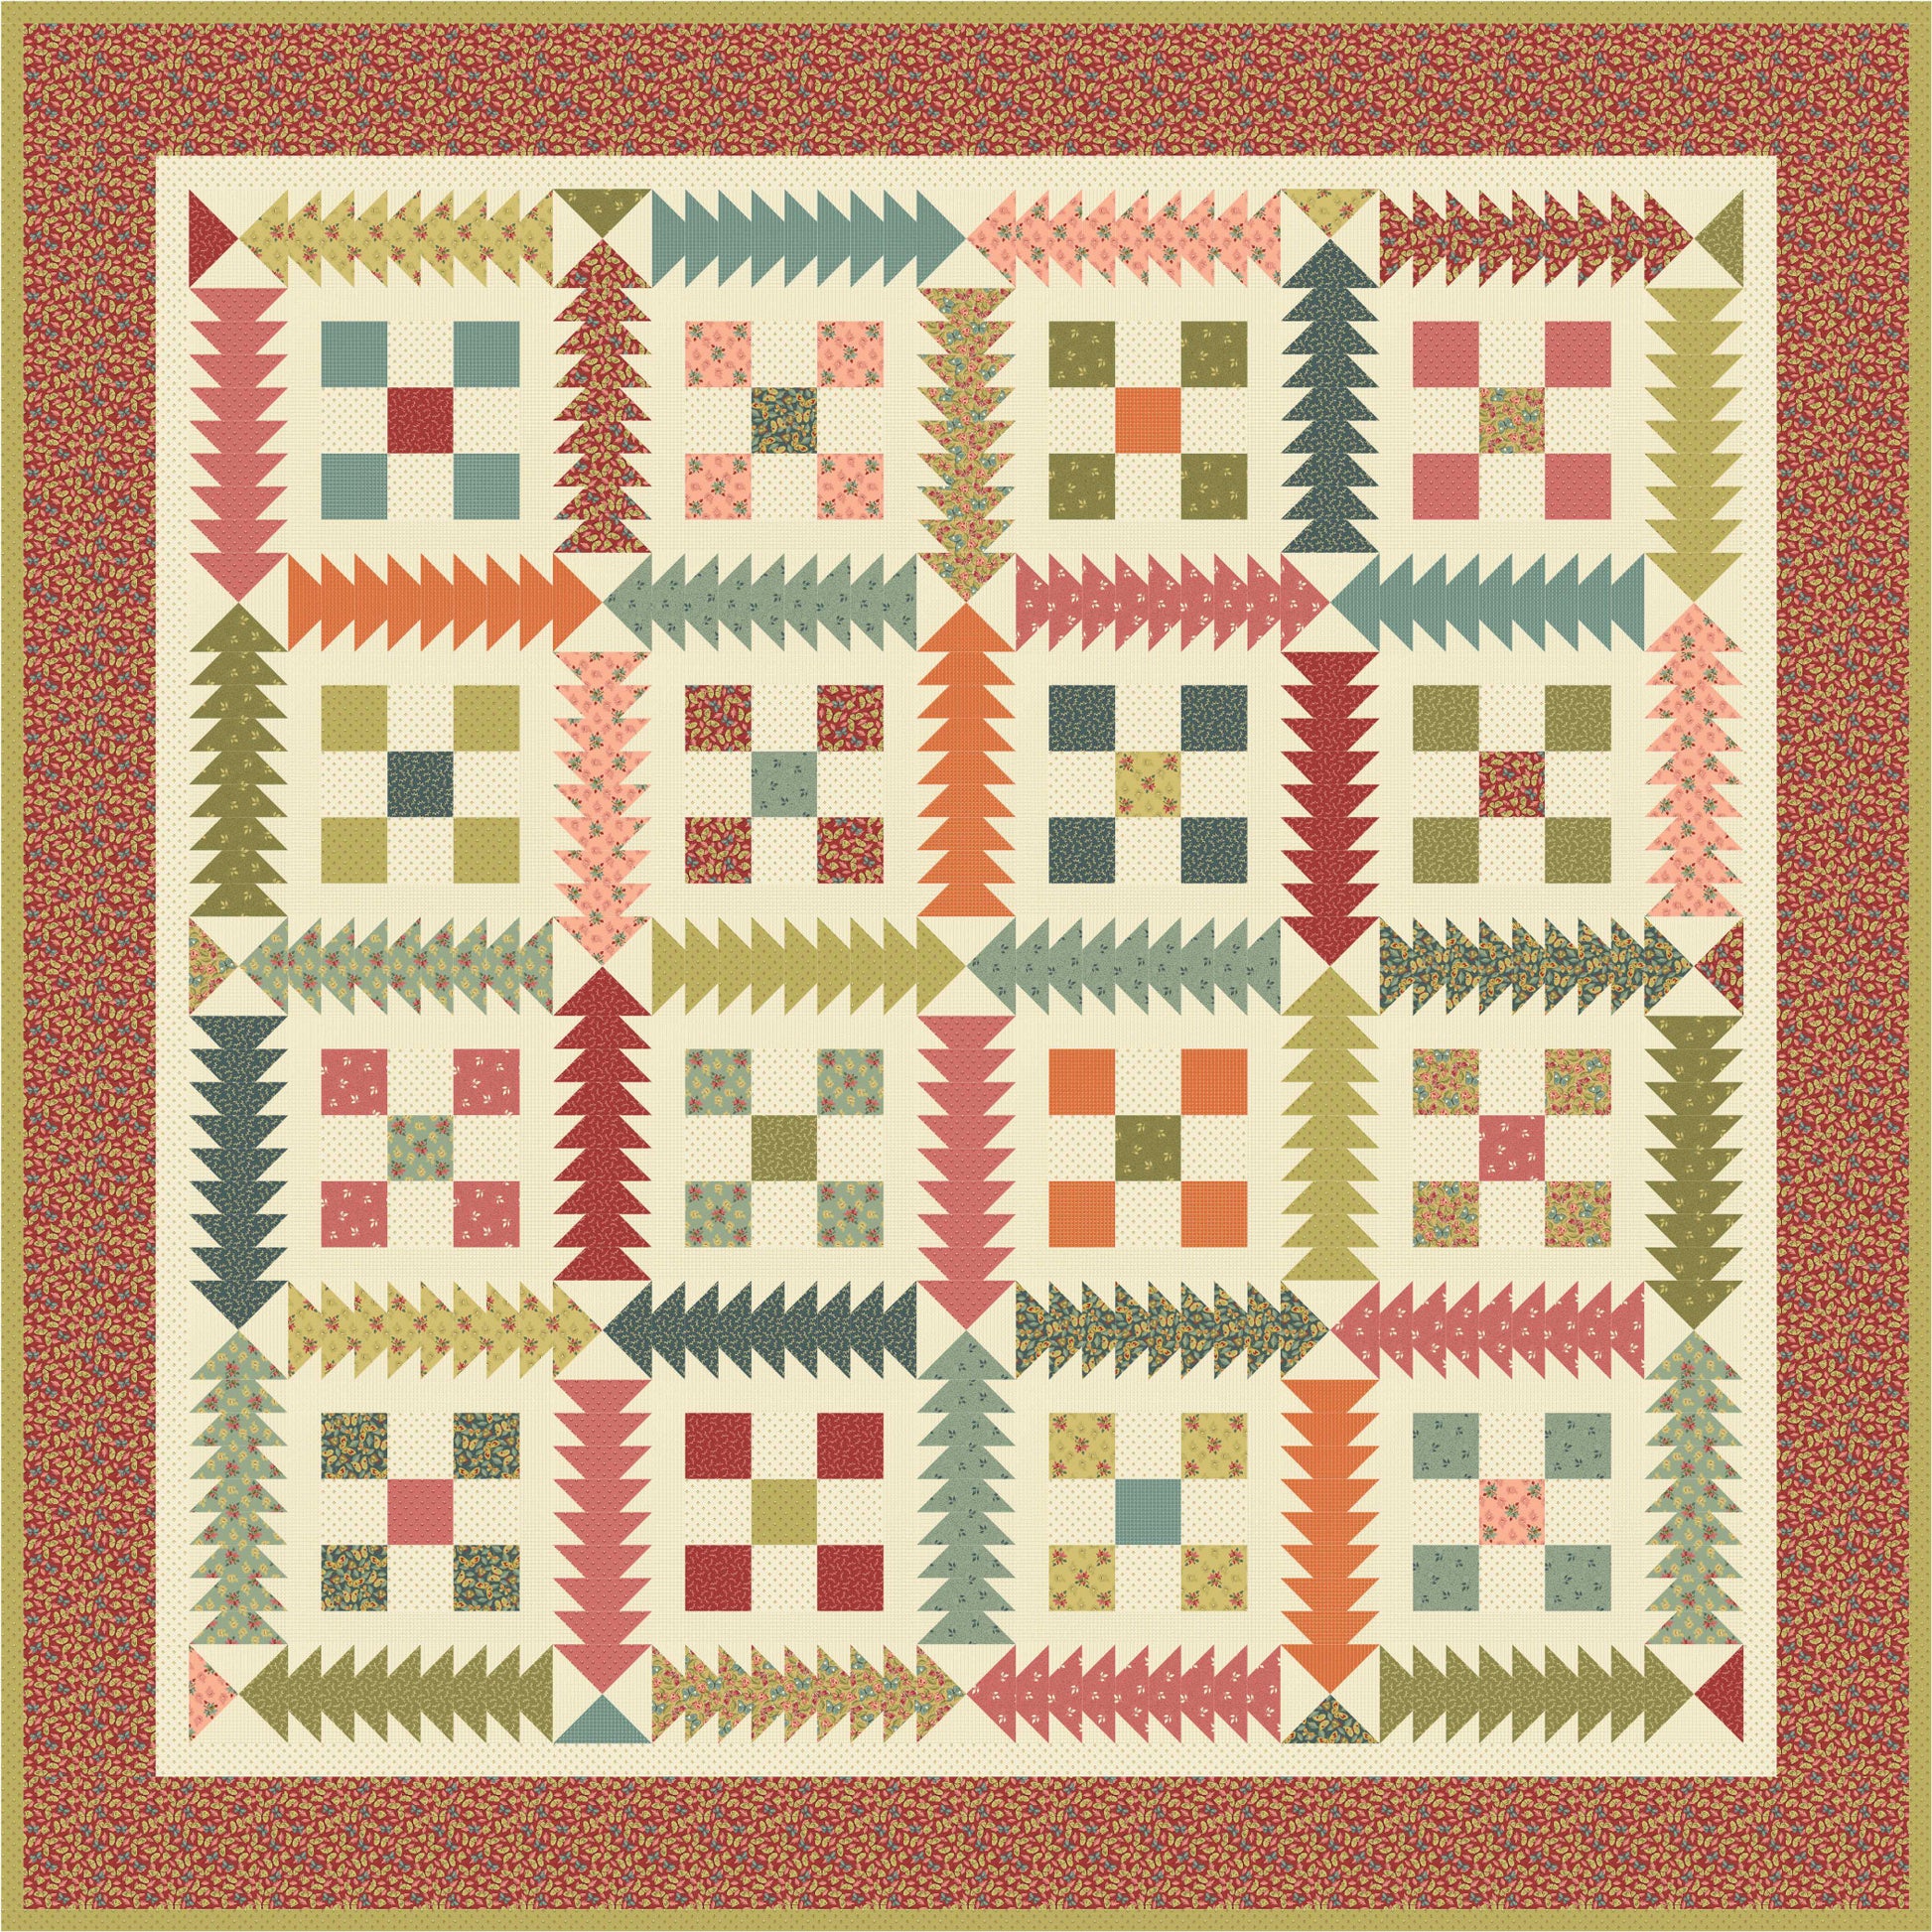 Back & Forth - Zigzag - Green Hills - Licence To Quilt